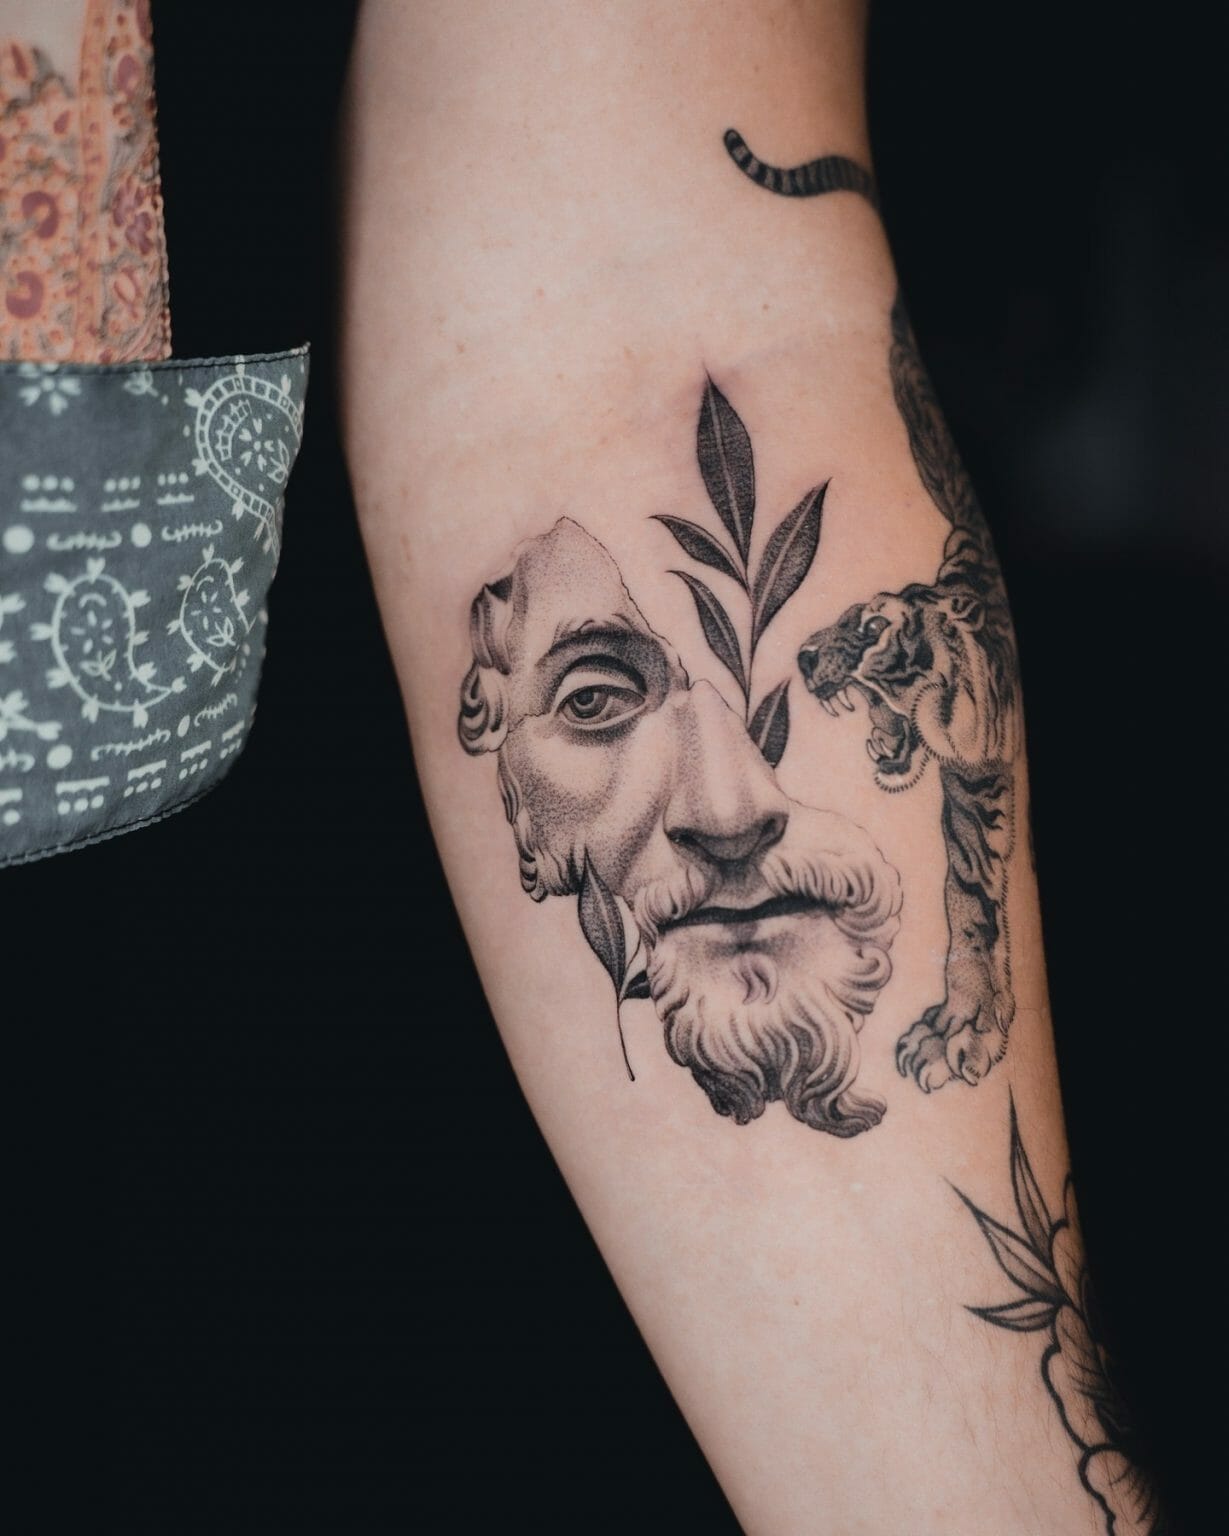 10 Best Stoic Tattoo Ideas That Will Blow Your Mind! - Outsons